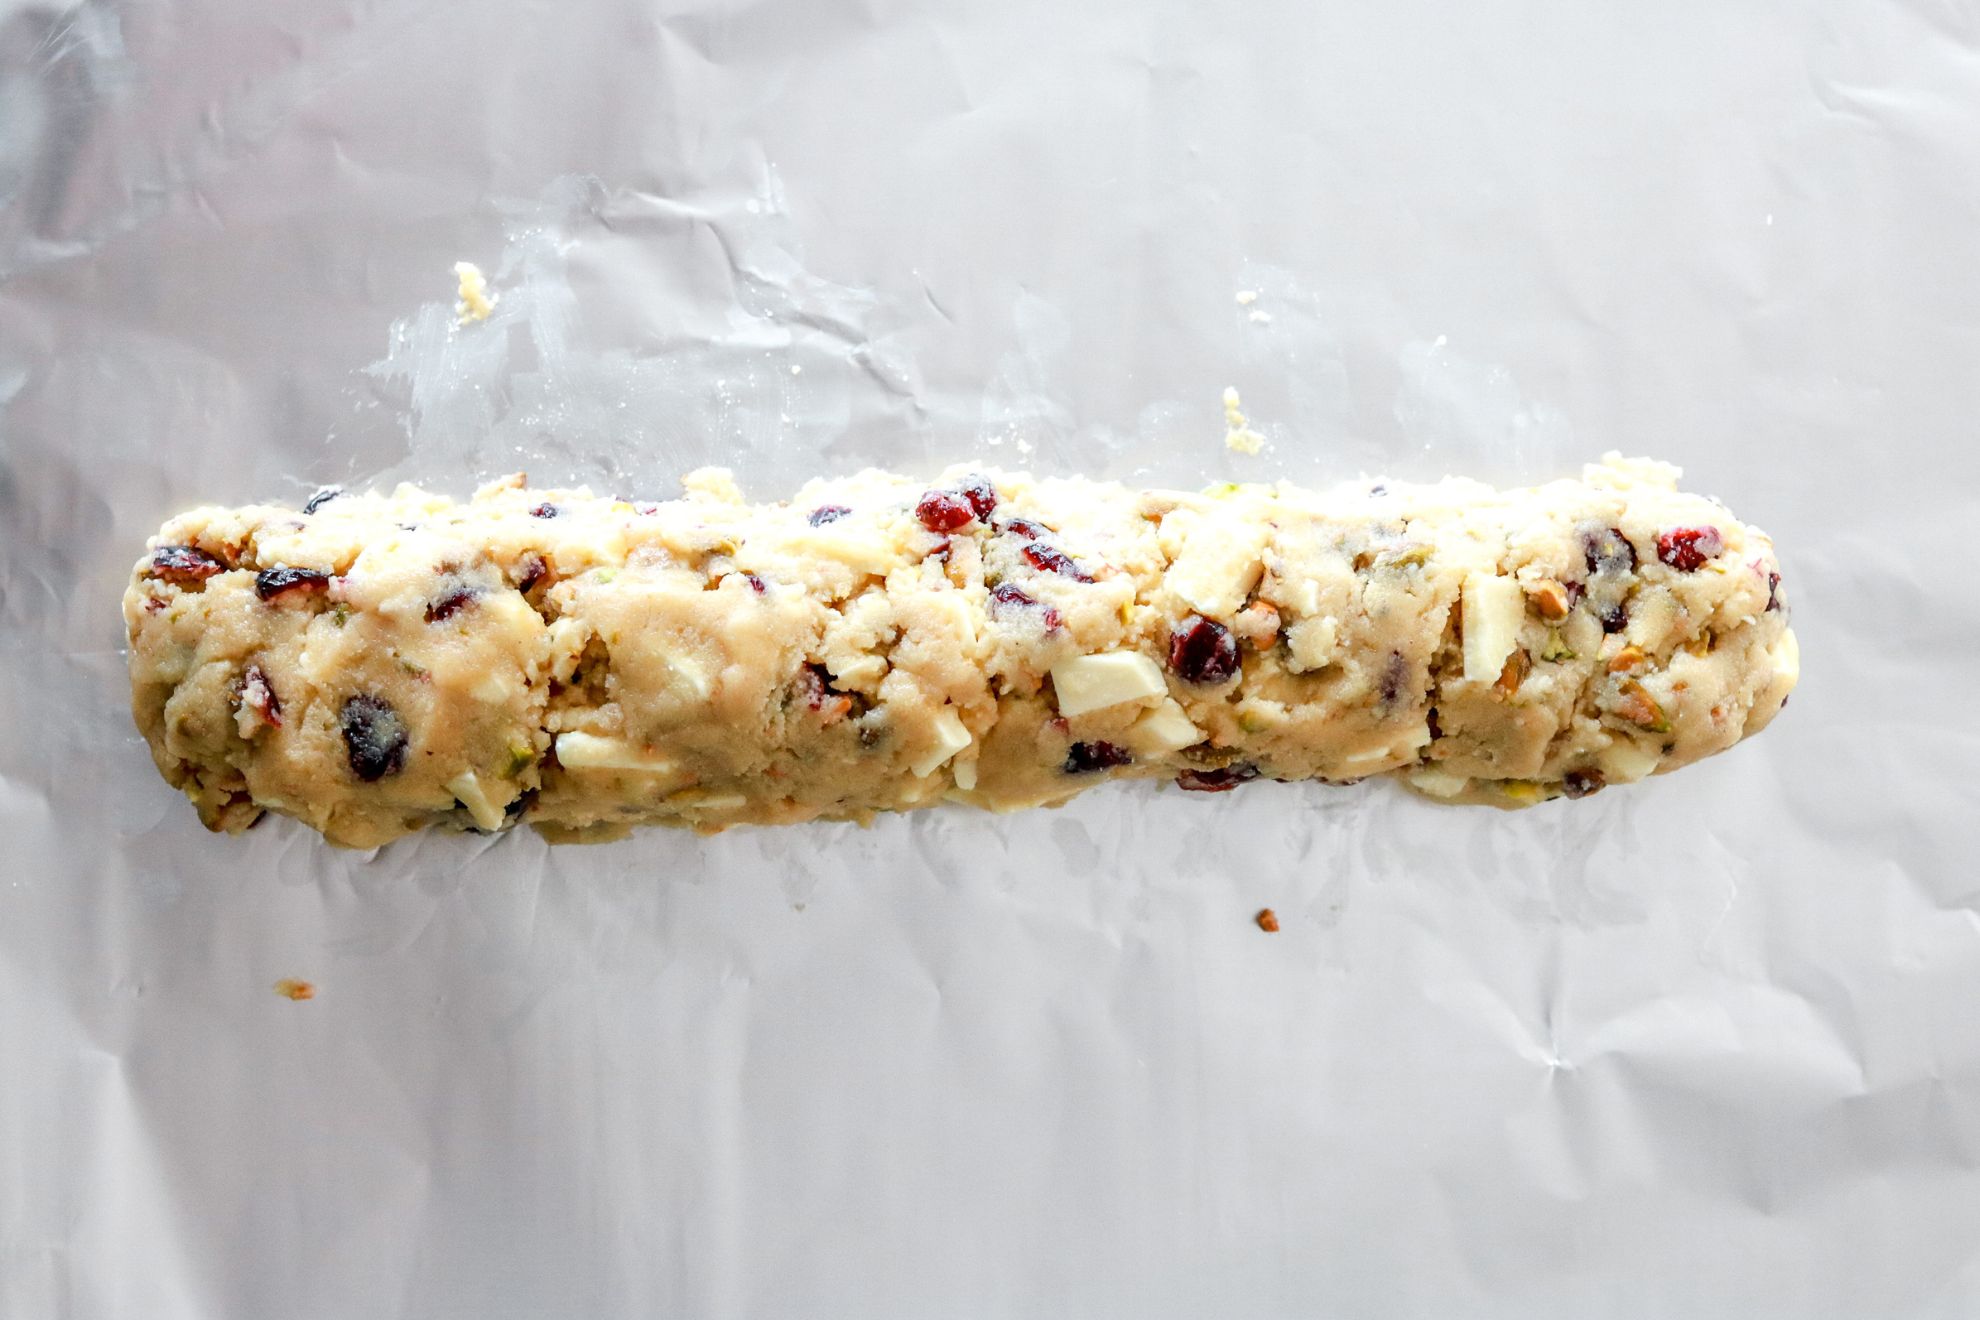 This is an overhead horizontal image of a shortbread cookie dough log with dried cranberries, white chocolate and pistachio pieces in it. The log sits on a piece of tin foil.